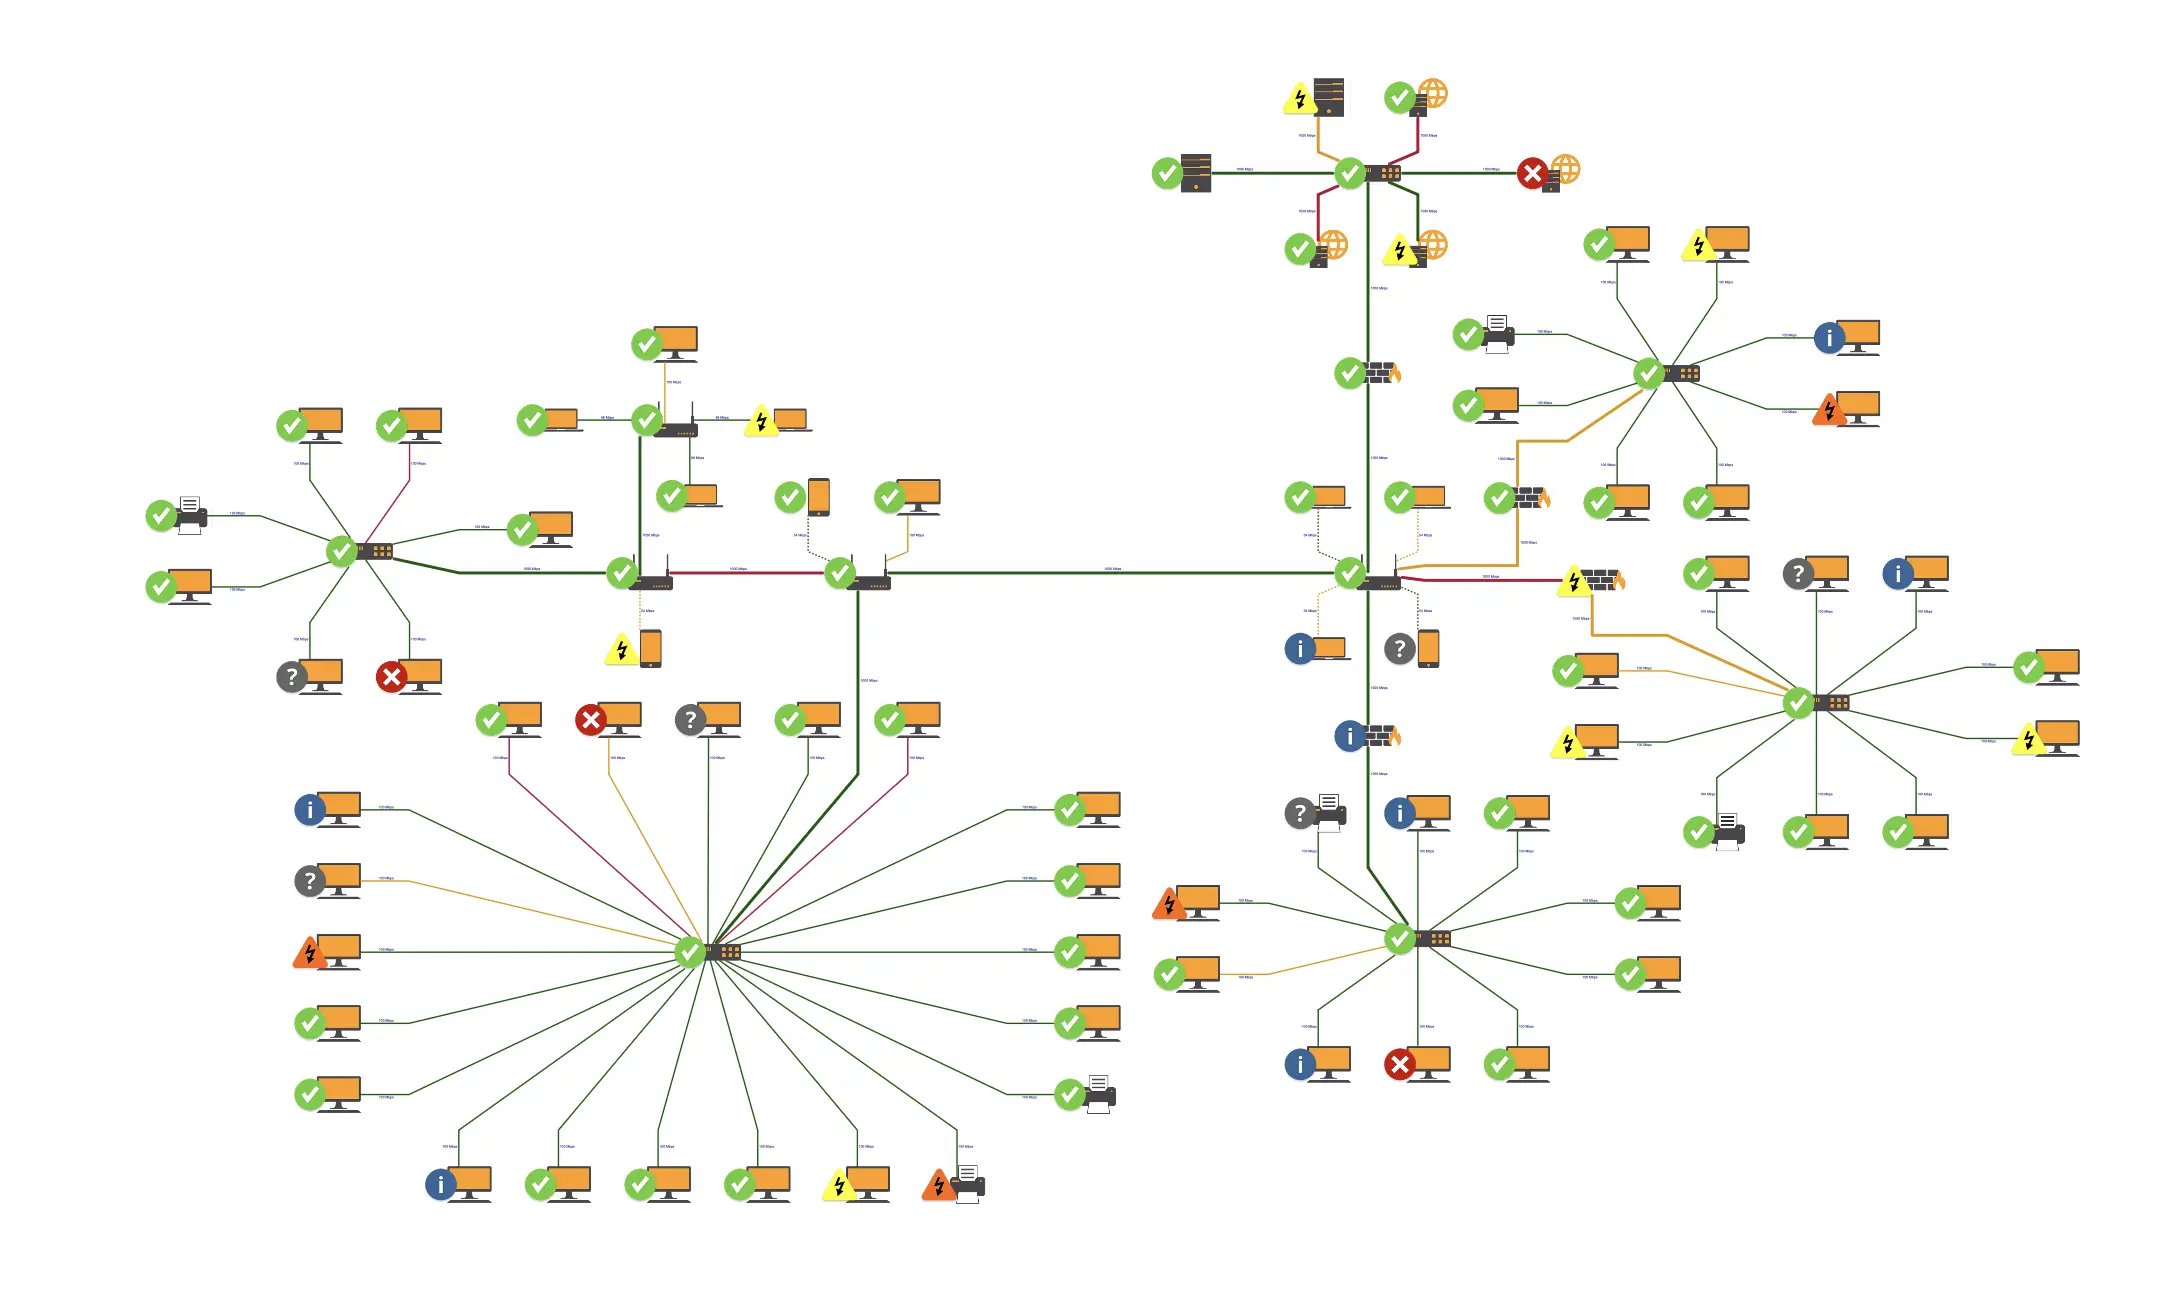 Knowledge graph visualization of an IT network